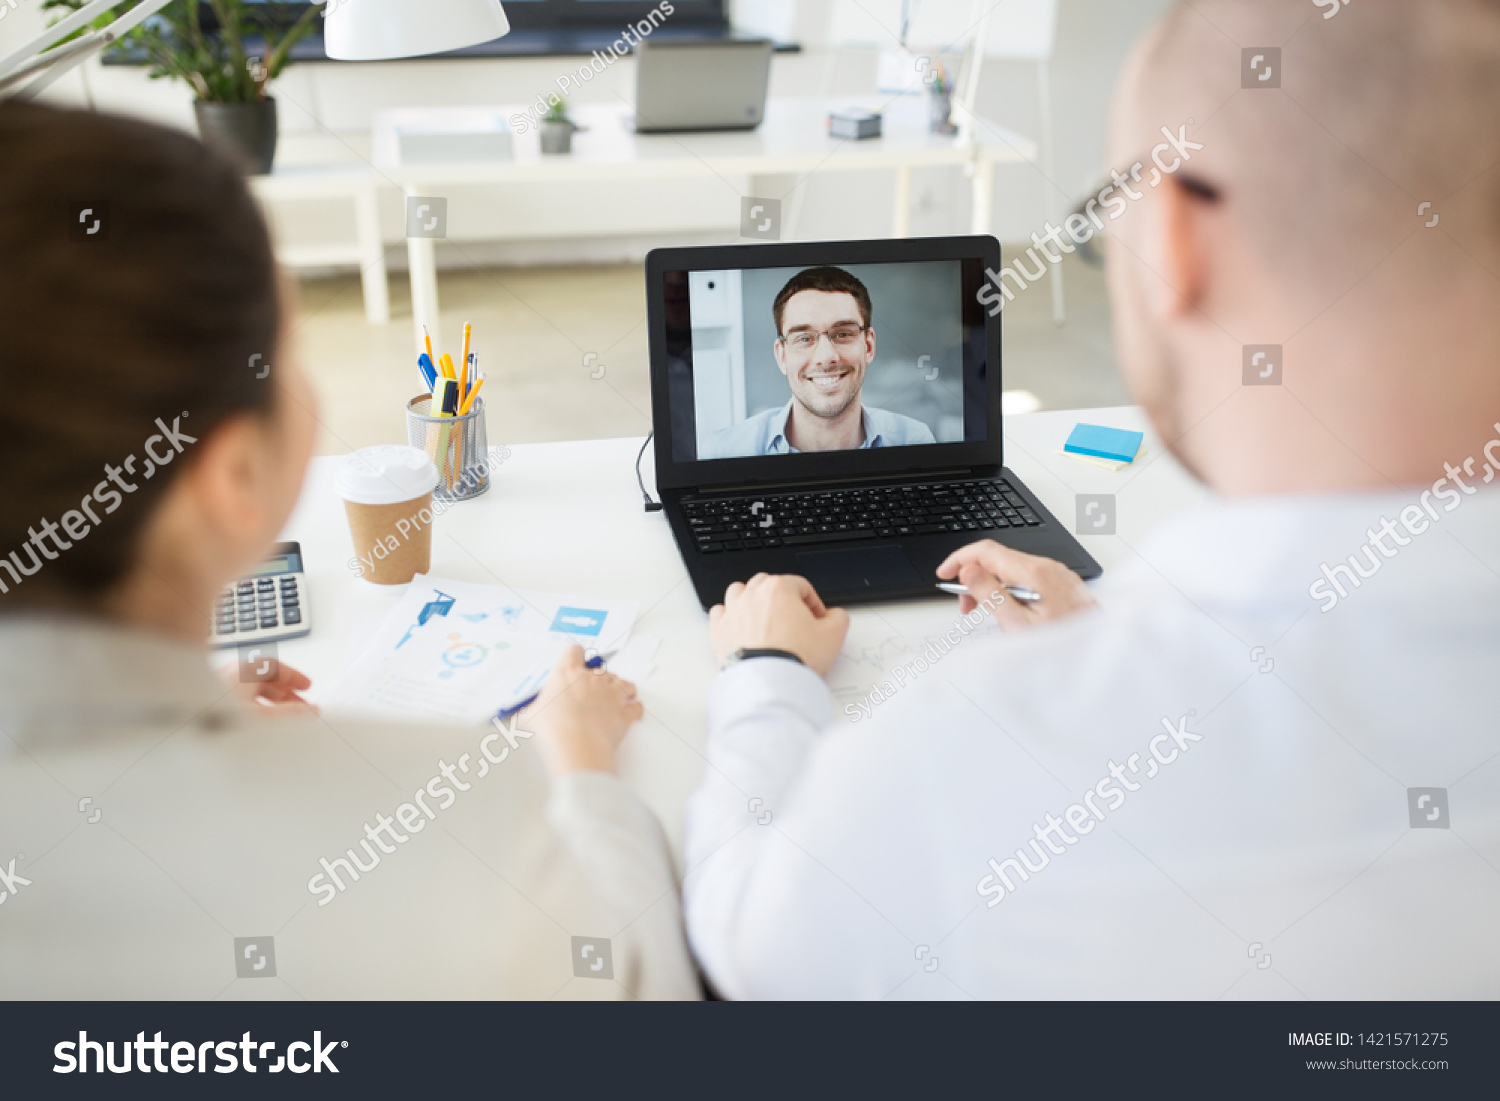 business, employment and technology concept - team of employers having video conference or job interview with new employee at office #1421571275